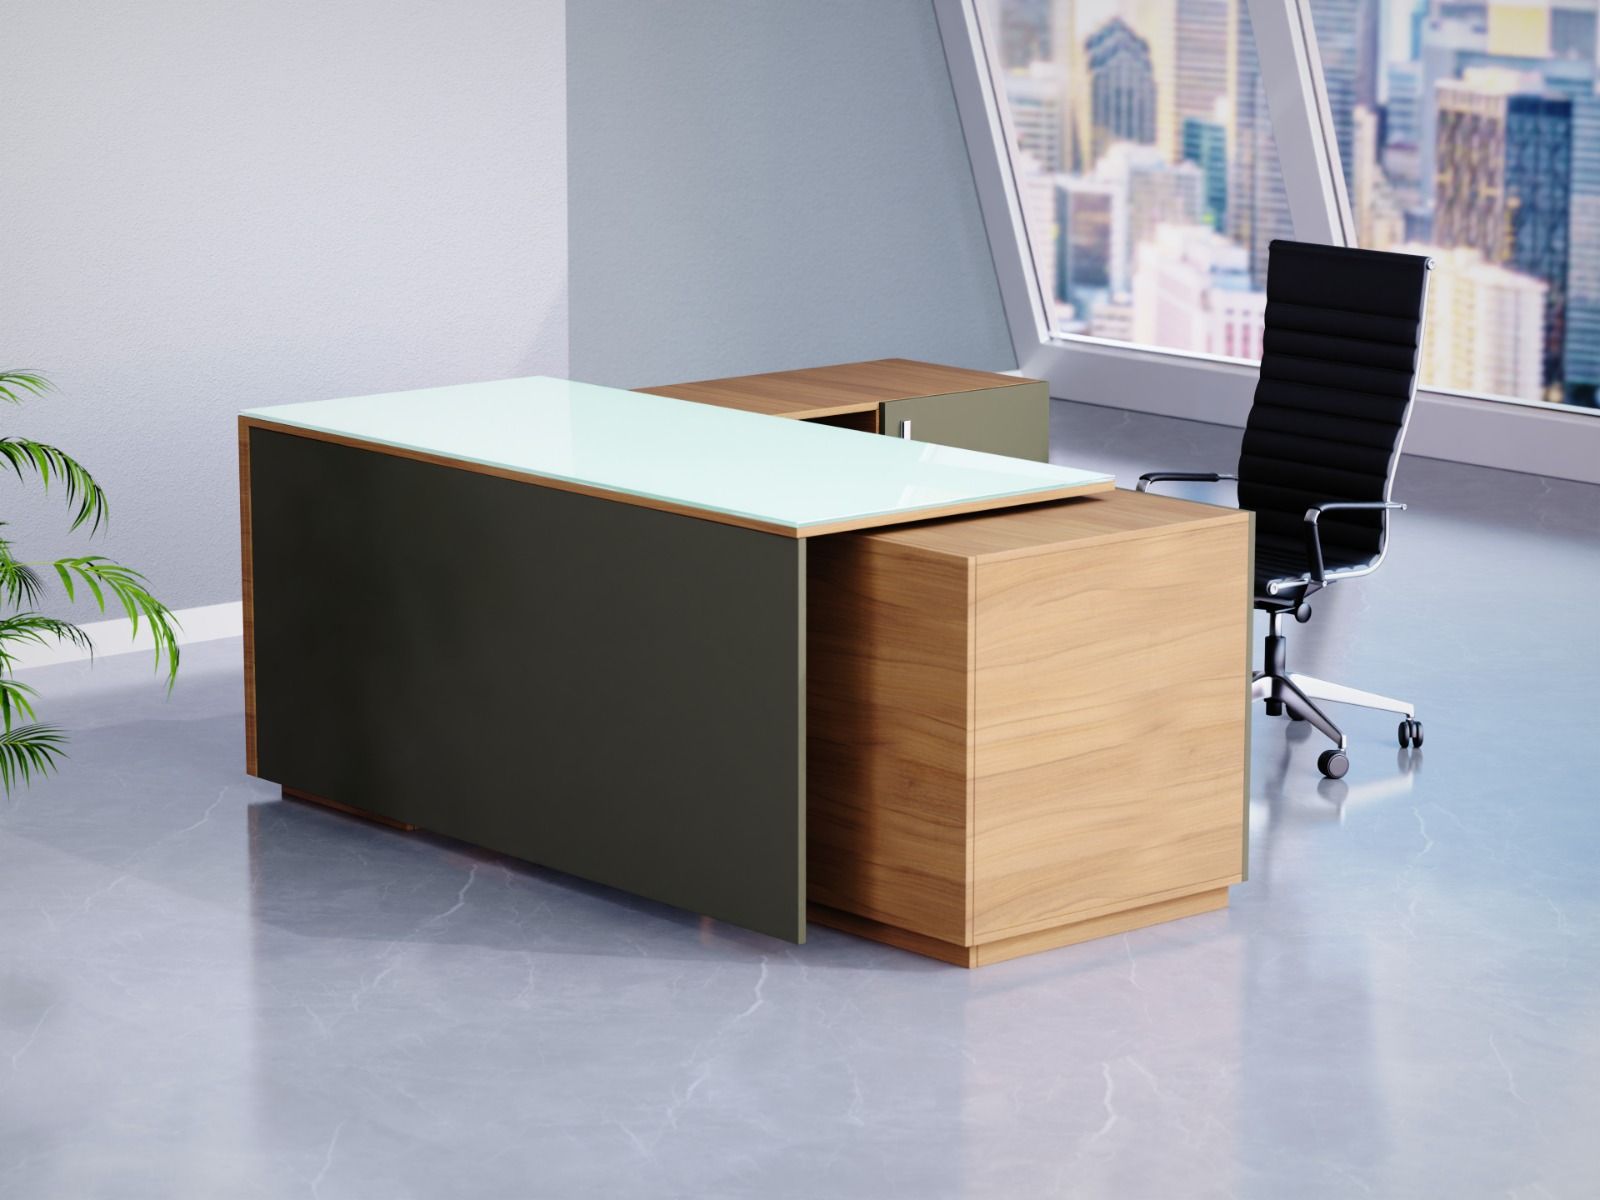 Modern Glass Desks: Sleek and Functional Office Furniture  Discover the perfect blend of style and functionality with our modern glass desks. Transform your office space into a contemporary haven with our sleek designs.For more visit : https://mahmayi.com/office-furniture/executive-office-furniture/glass-execut by mahmayiuae